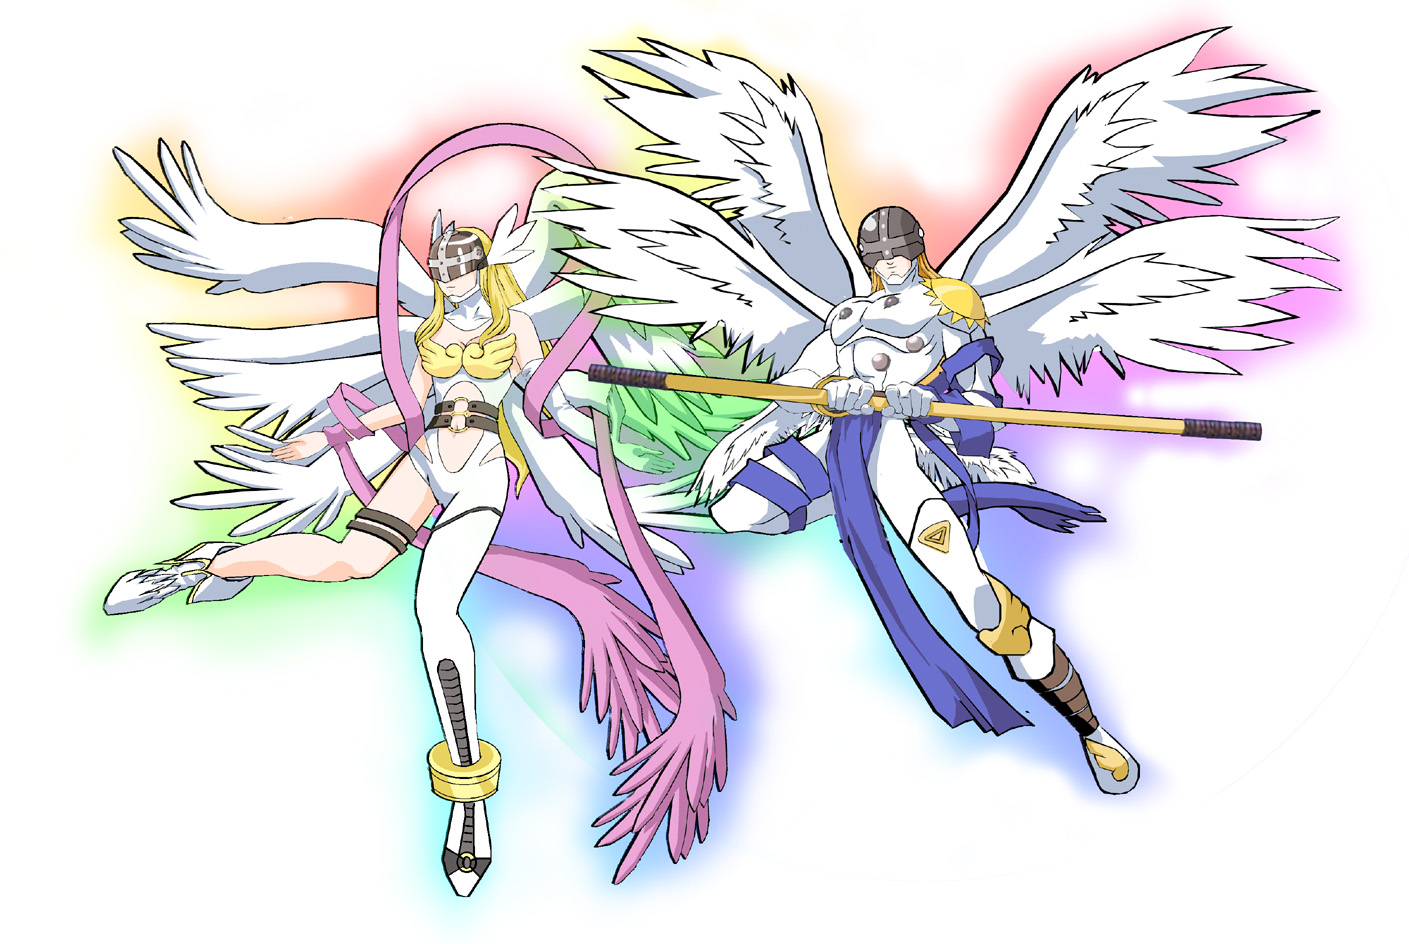 Angels of Light and Hope by Angemon